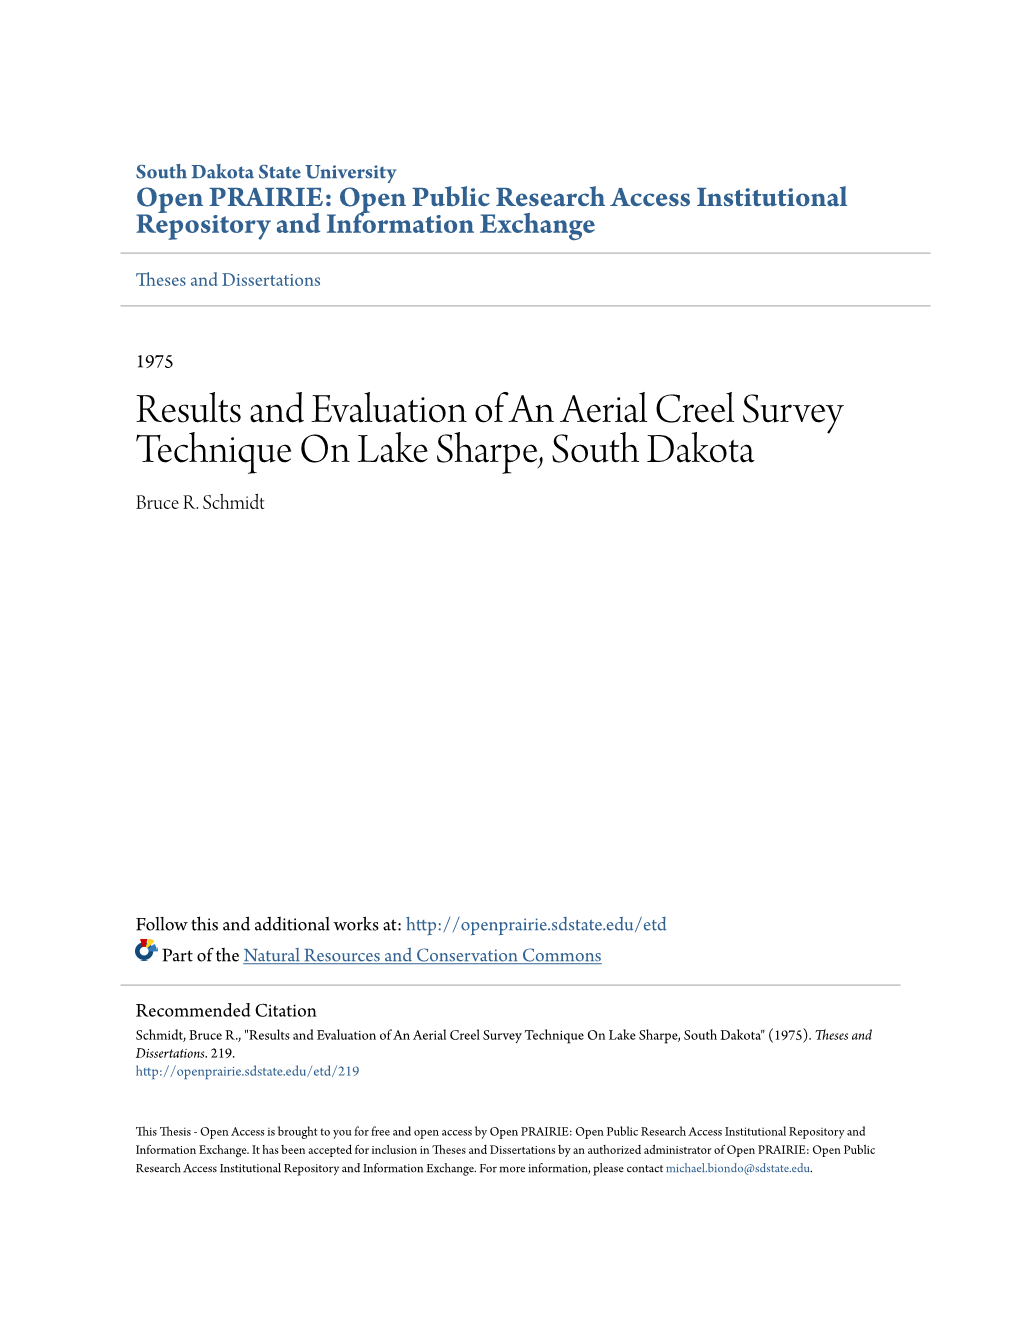 Results and Evaluation of an Aerial Creel Survey Technique on Lake Sharpe, South Dakota Bruce R